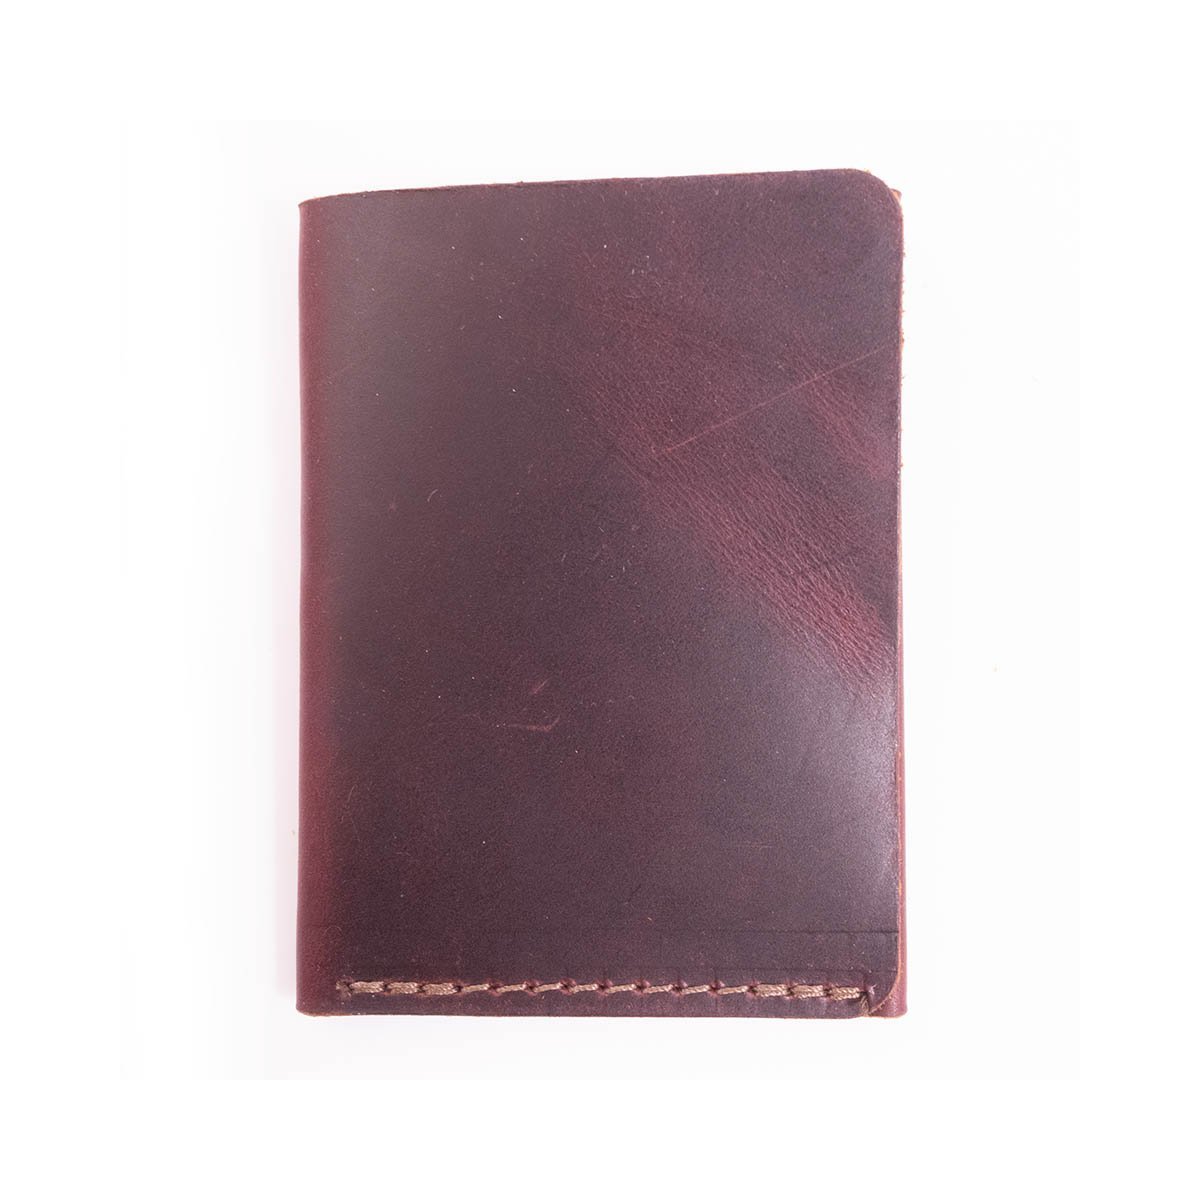 Commuter Leather Wallet Handmade in the USA – Rustico